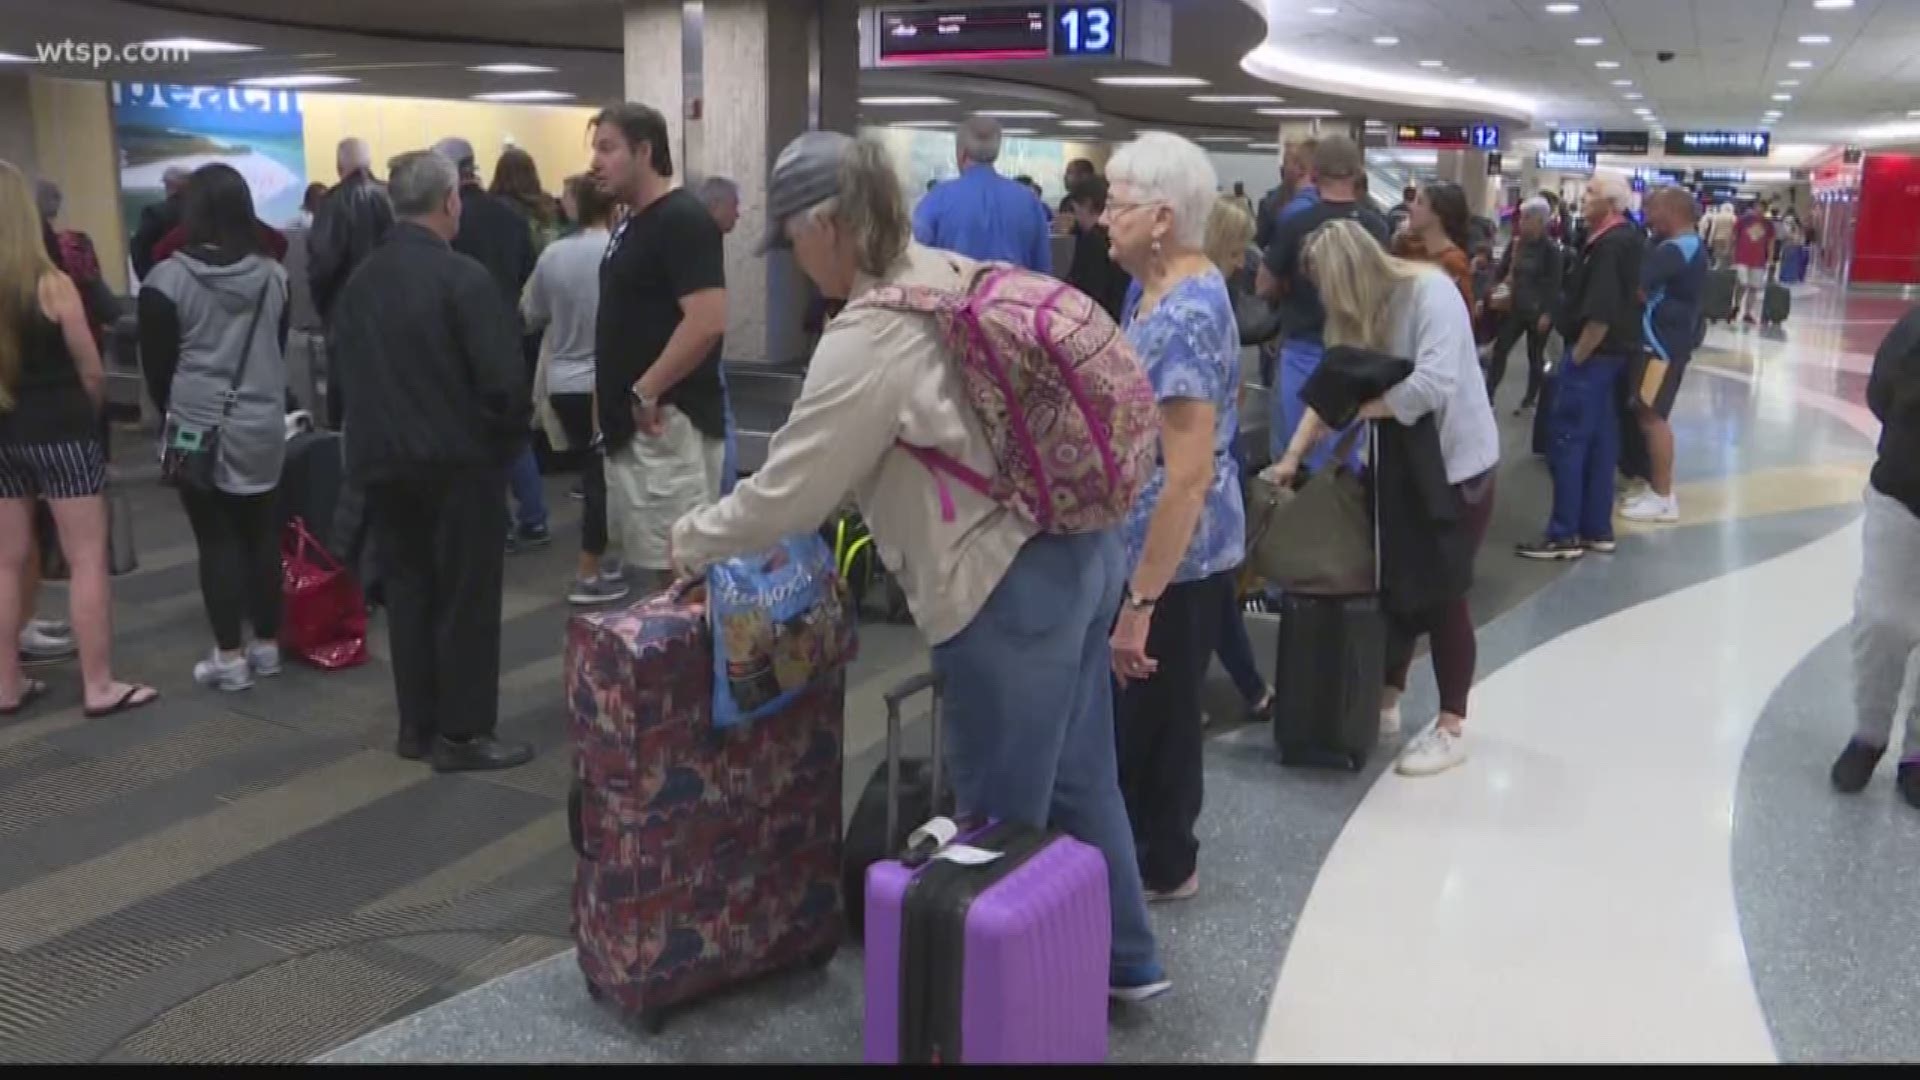 The Saturday after Thanksgiving is the second busiest day for travel at TPA.